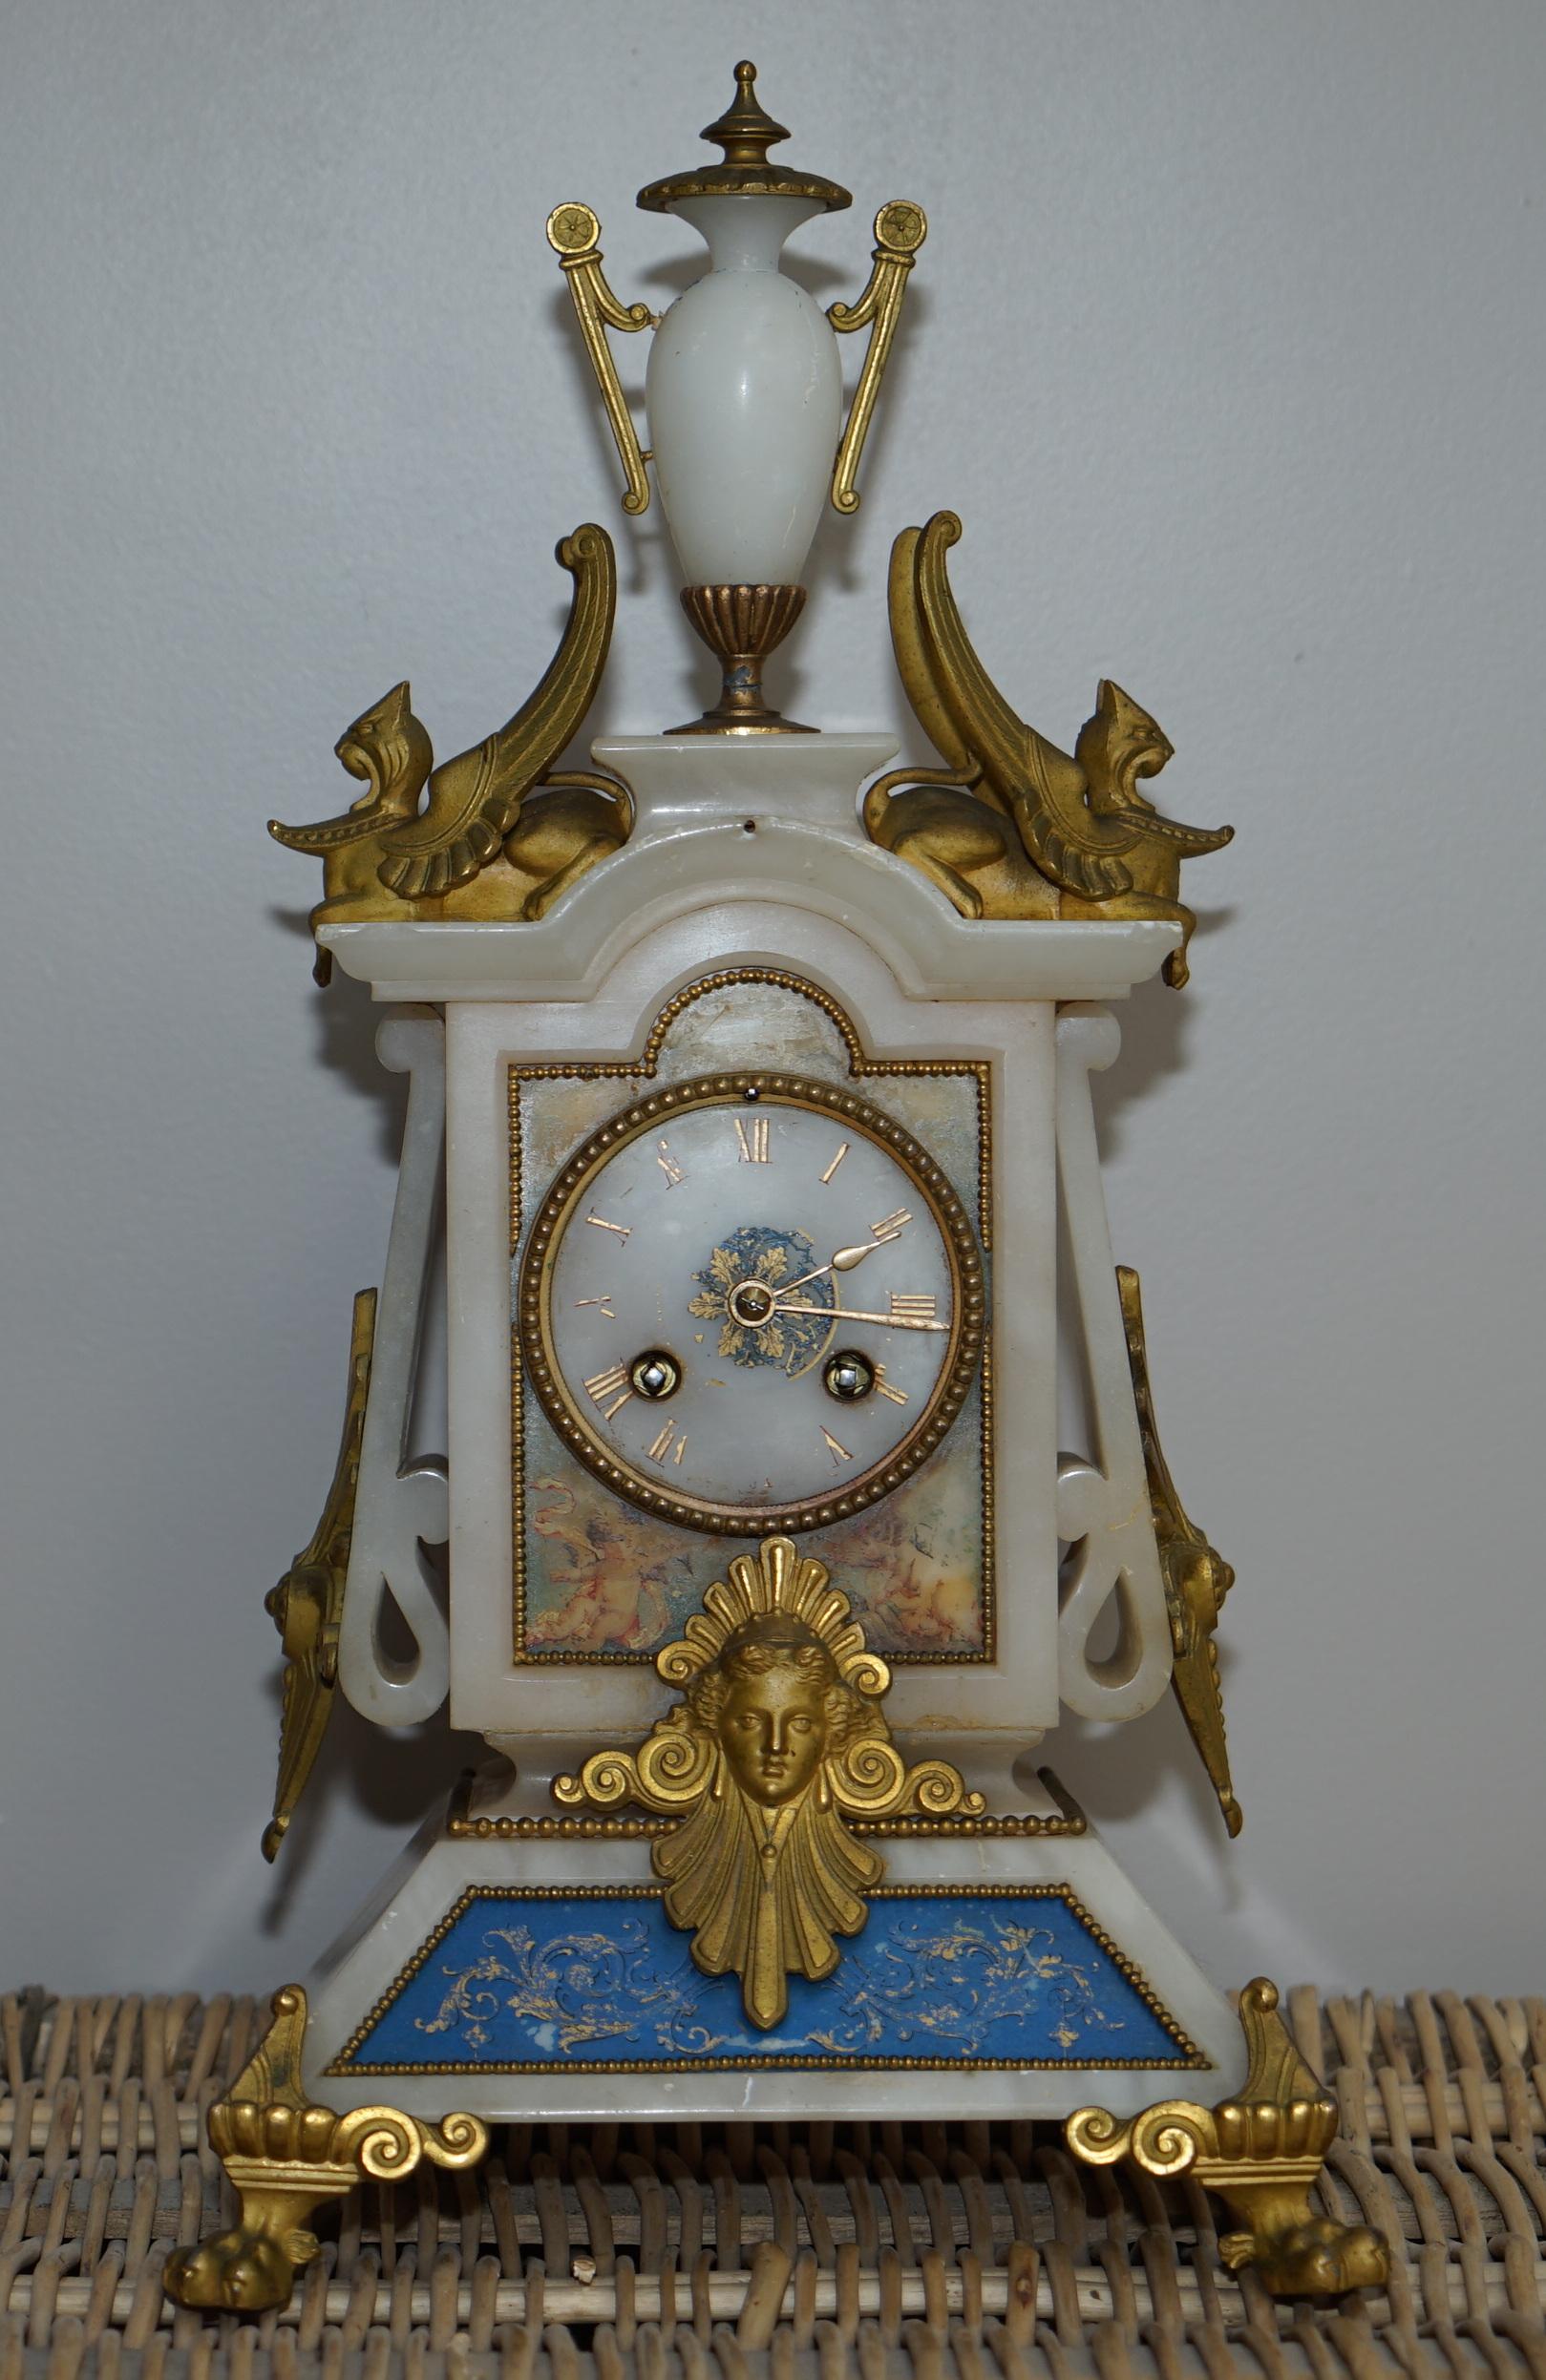 Wimbledon-Furniture

Wimbledon-Furniture is delighted to offer for sale this stunning circa 1850 French Alabaster and gold gilt mantle clock

Please note the delivery fee listed is just a guide, it covers within the M25 only, for an accurate